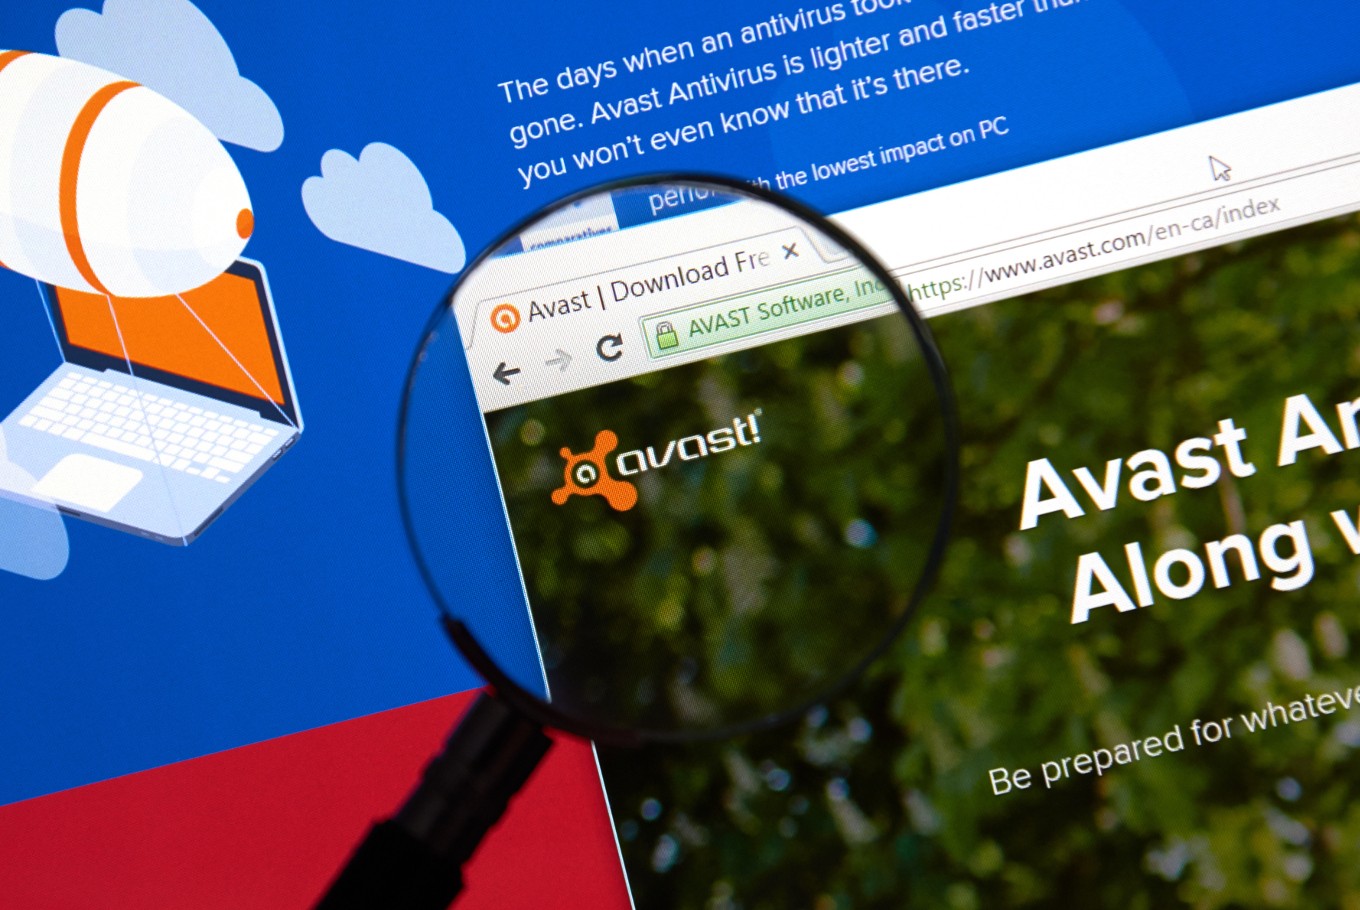 avast warning this site could have harmed your computer